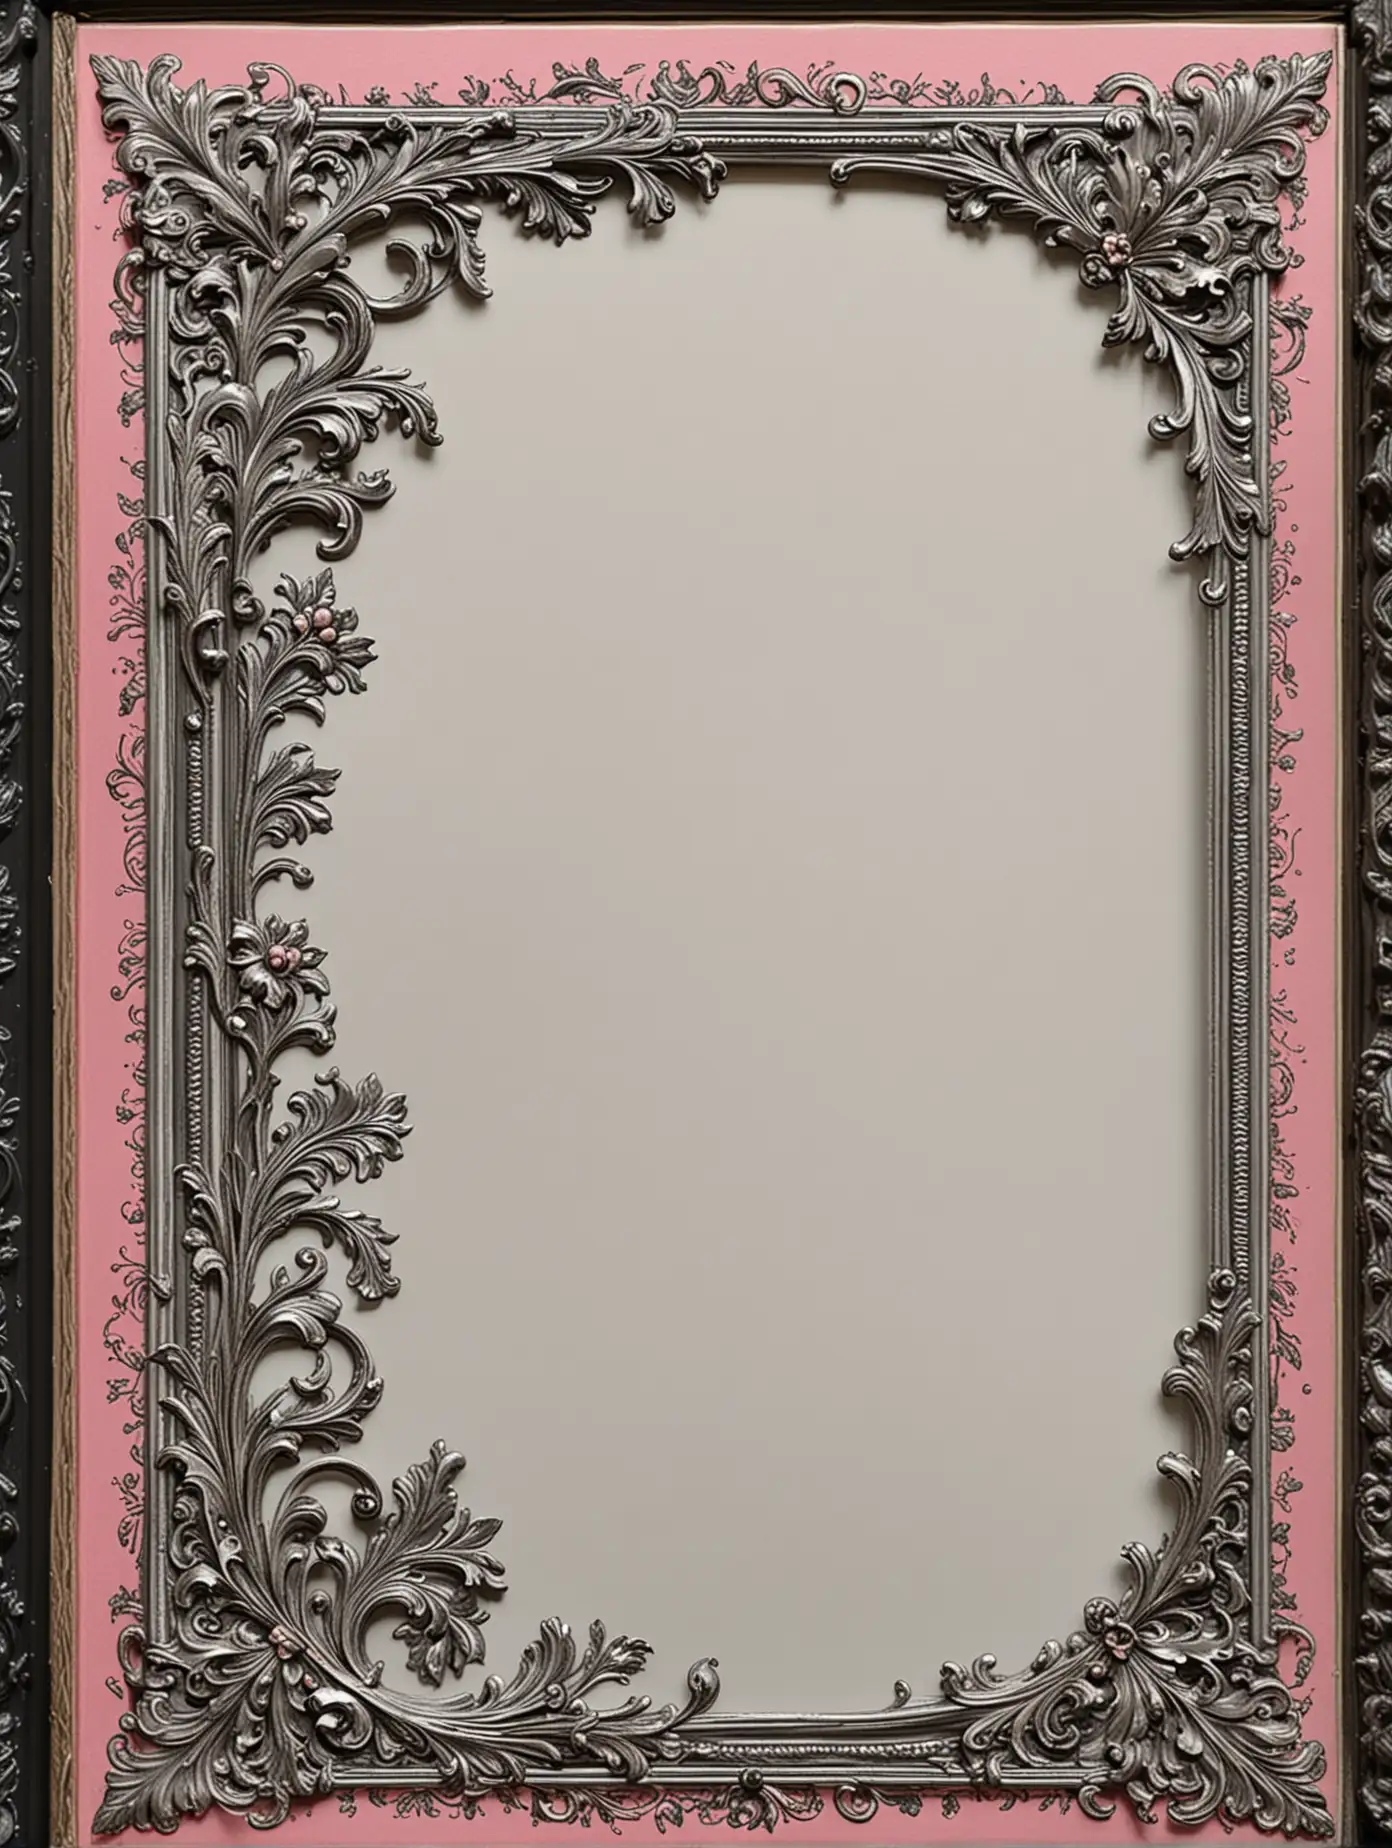 silver, thin ornate book border frame scrollwork, black and pink acanthus scrolls